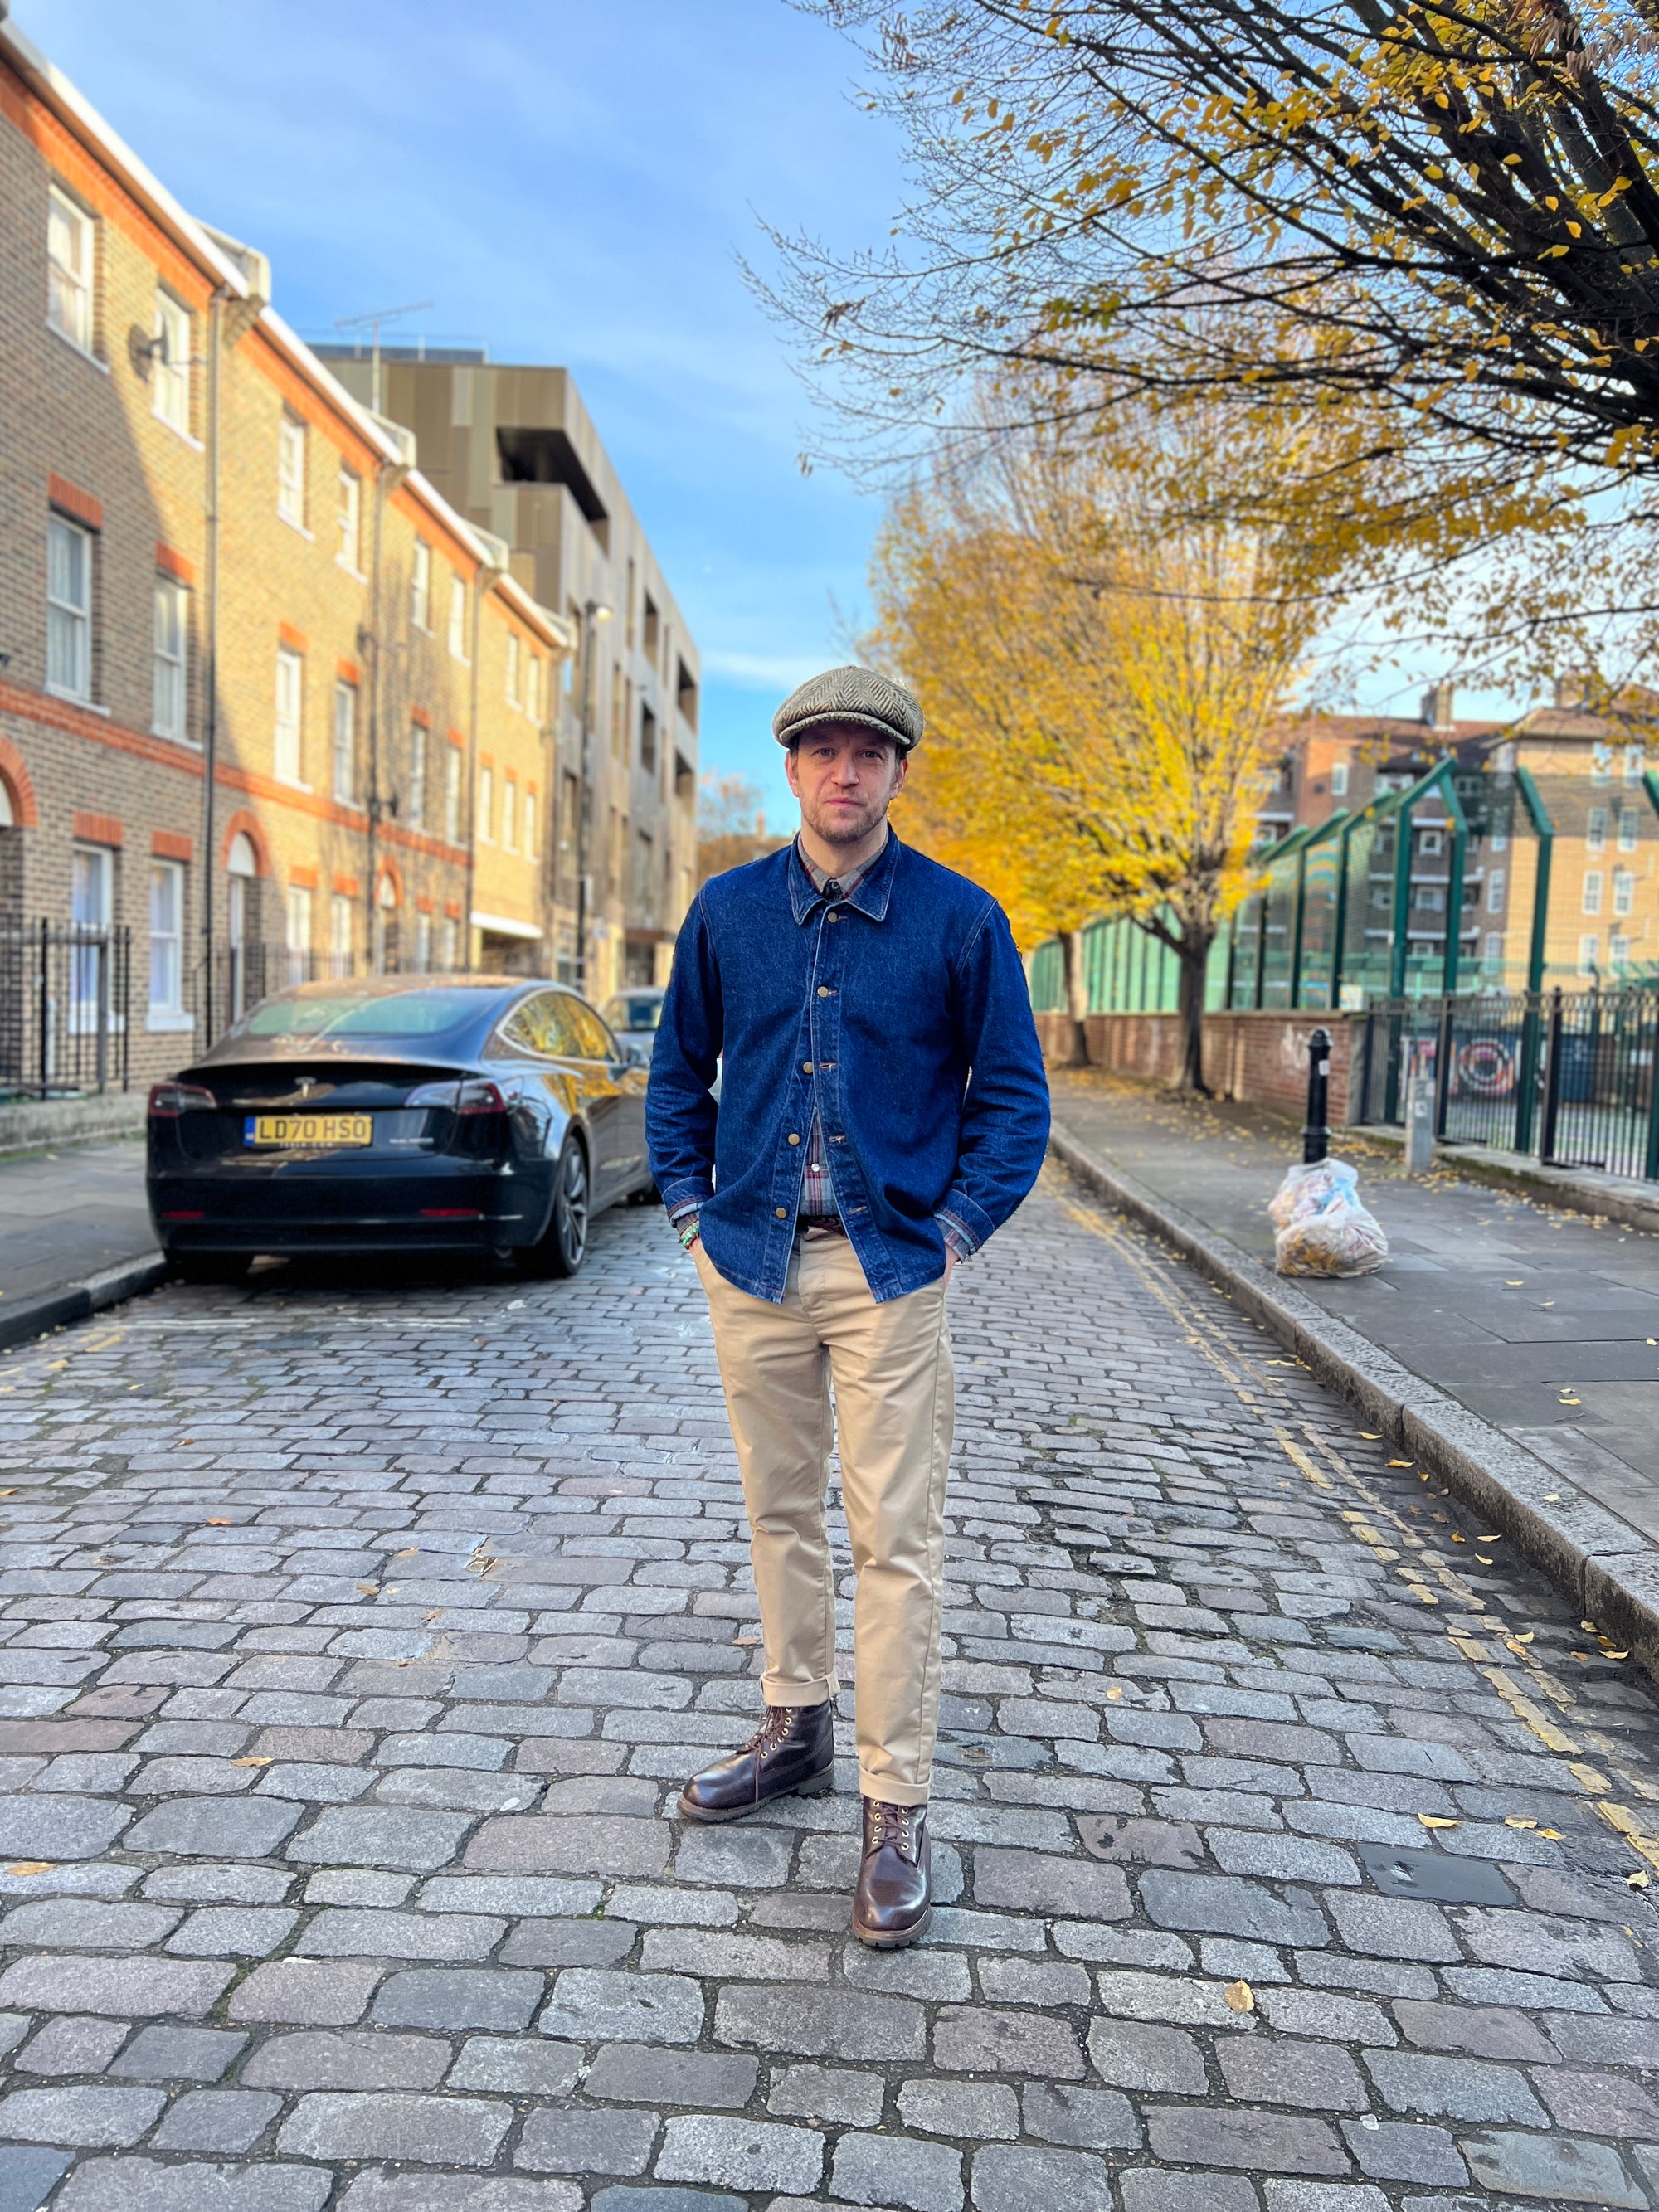 image of George Russo standing in a cobbled street